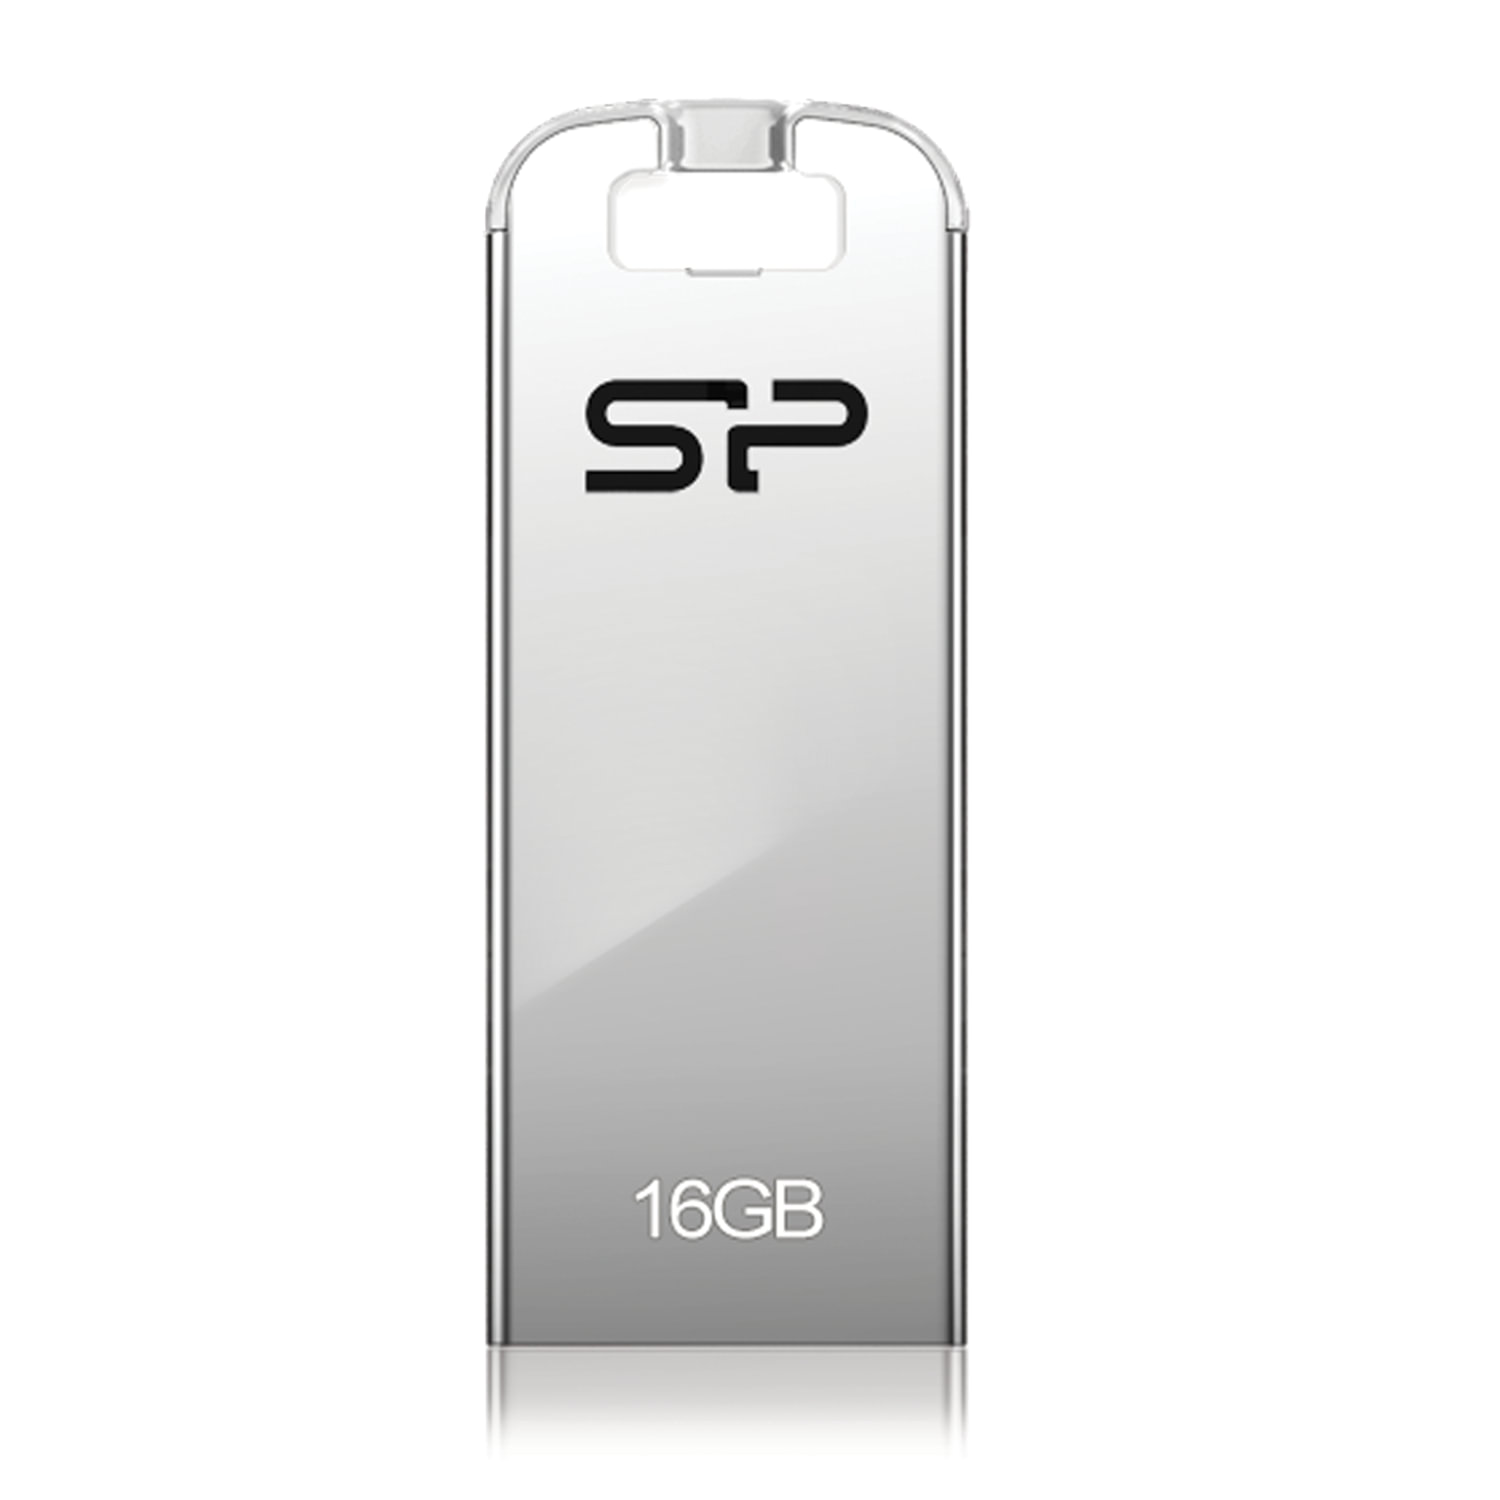 Formatter silicon power v 3.7 0.0. USB 8gb Silicon Power Touch t03 металл. SP Silicon Power 4gb флешка. Флешка Silicon Power Touch t03-2014 Horse-year Edition 16gb. Флешка Silicon Power Touch t03 64gb.